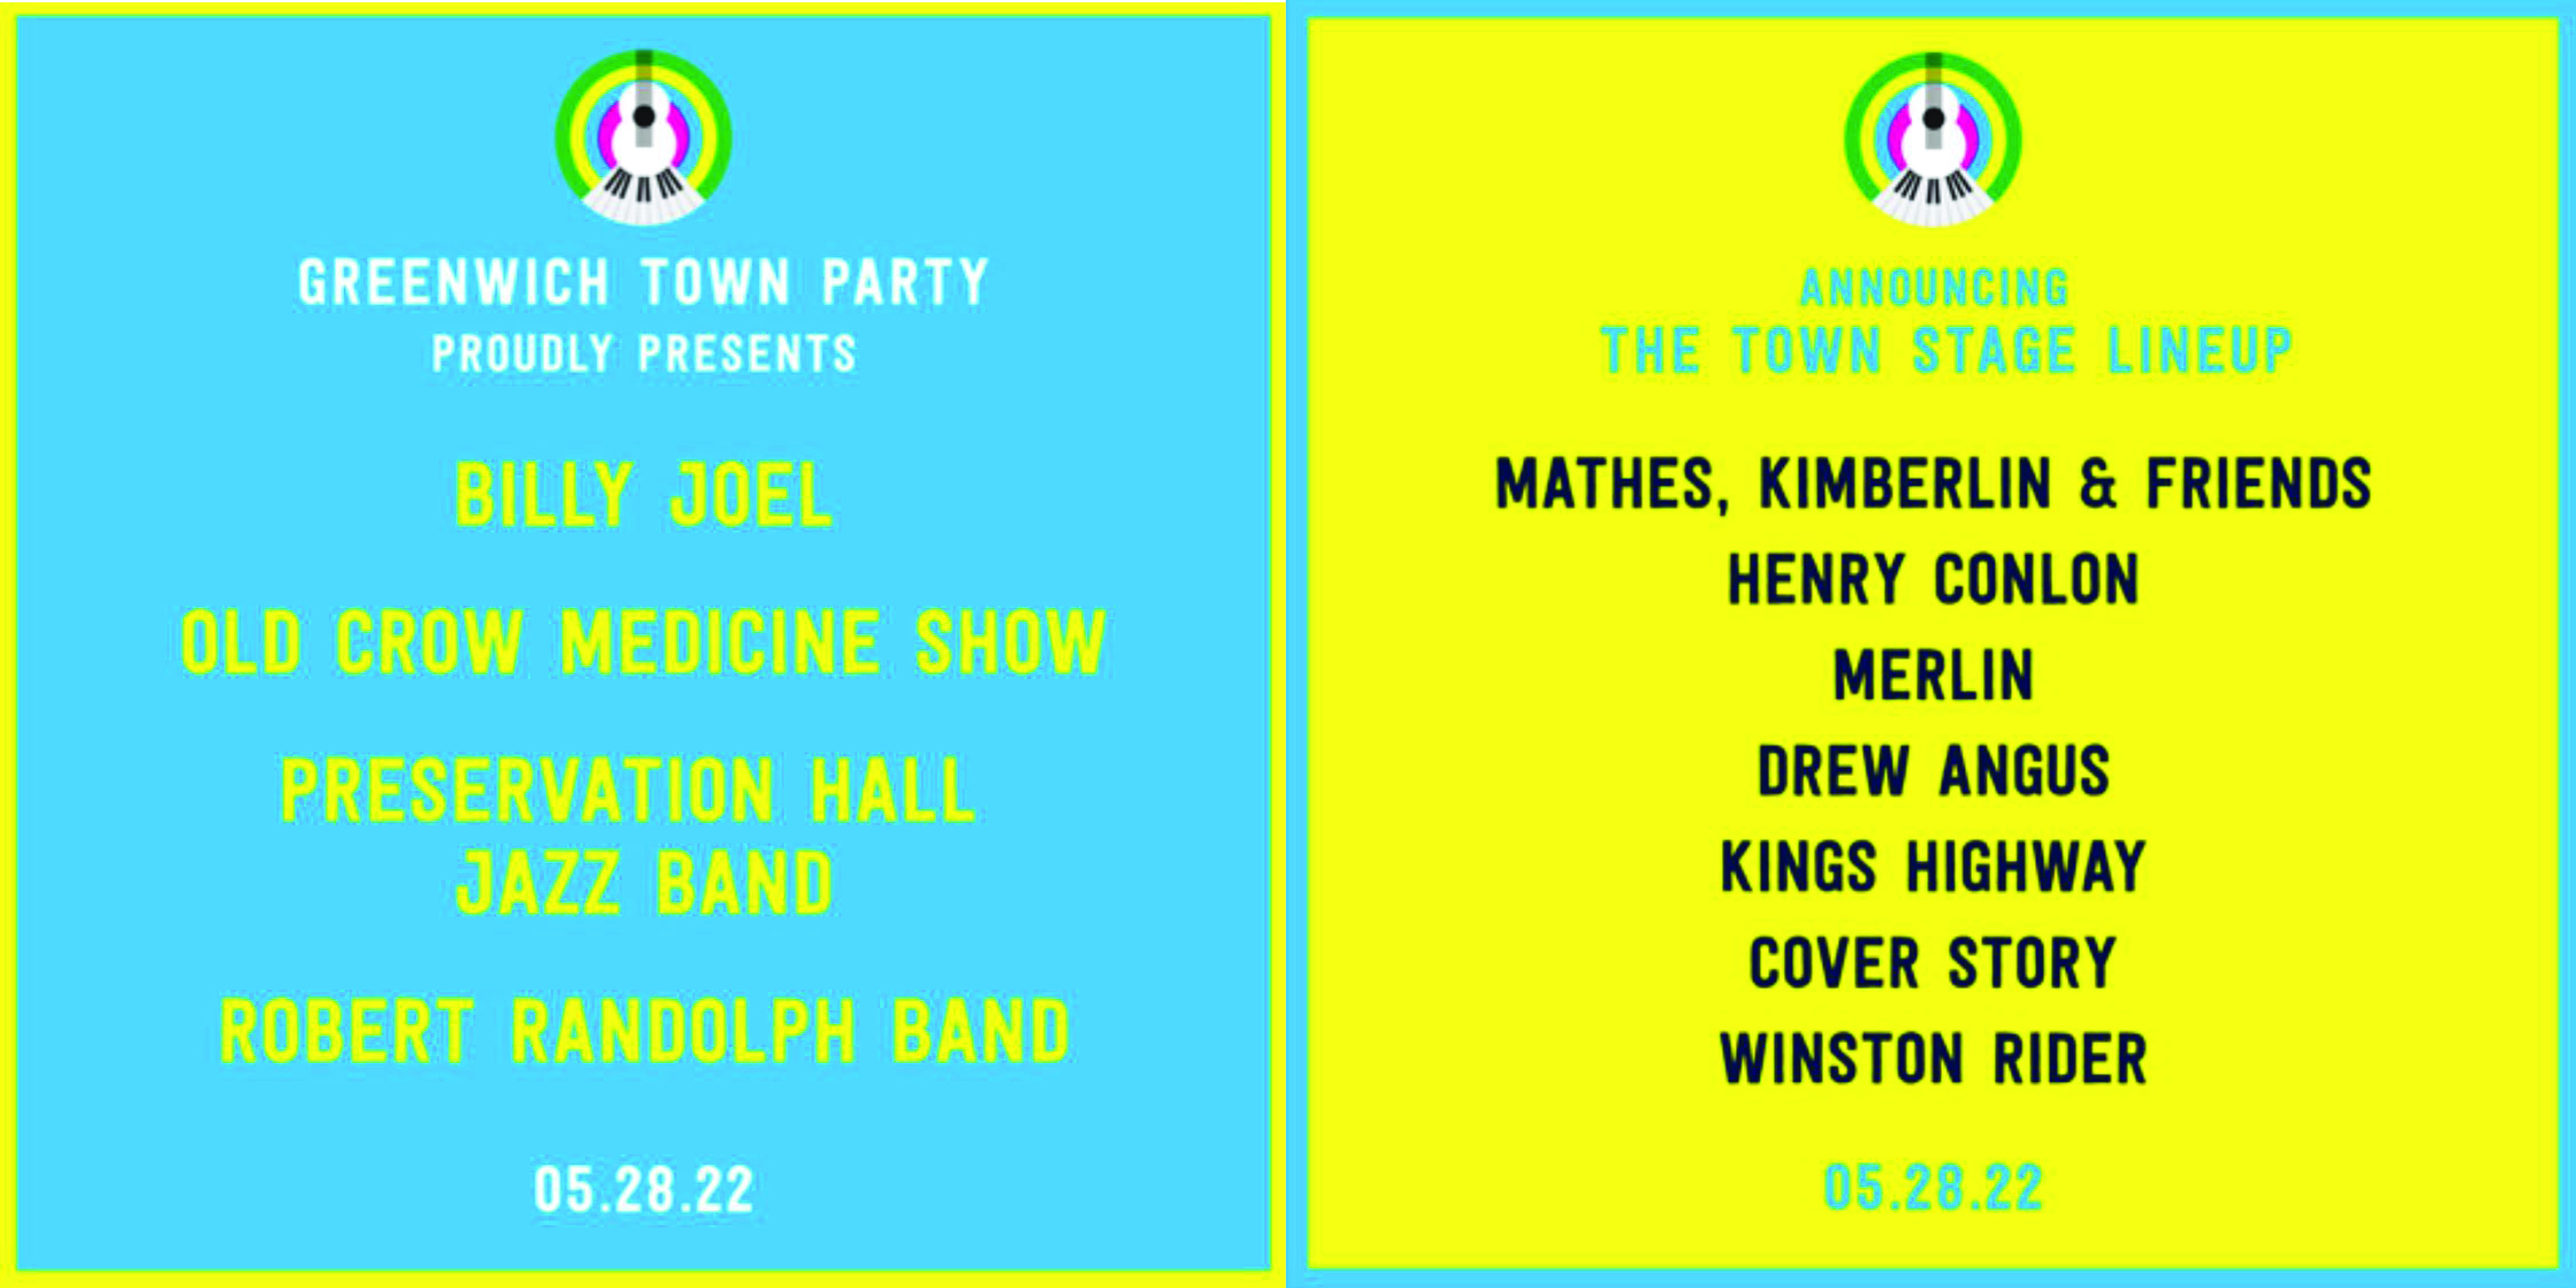 GREENWICH TOWN PARTY ANNOUNCES FULL MAIN STAGE LINEUP, SEVEN LOCAL